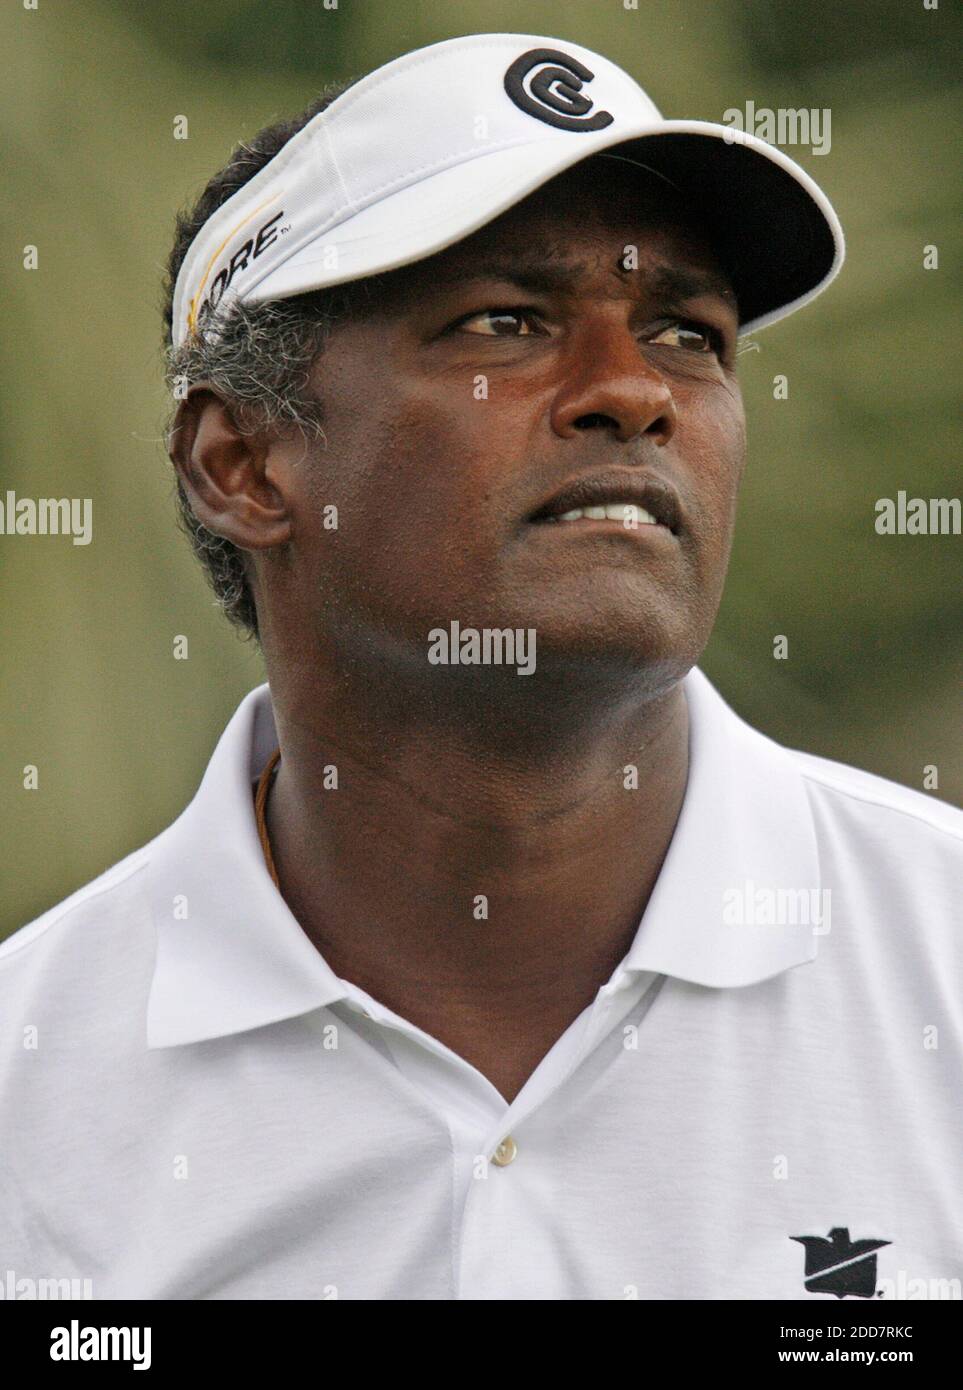 NO FILM, NO VIDEO, NO TV, NO DOCUMENTARY - Vijay Singh watches his drive on the 17th hole at the 2008 World Golf Championship-CA at the Doral Golf Resort & Spa in Miami, FL, USA on March 24, 2008, after rain delayed the finish. Photo by John VanBeekum/Miami Herald/MCT/Cameleon/ABACAPRESS.COM Stock Photo